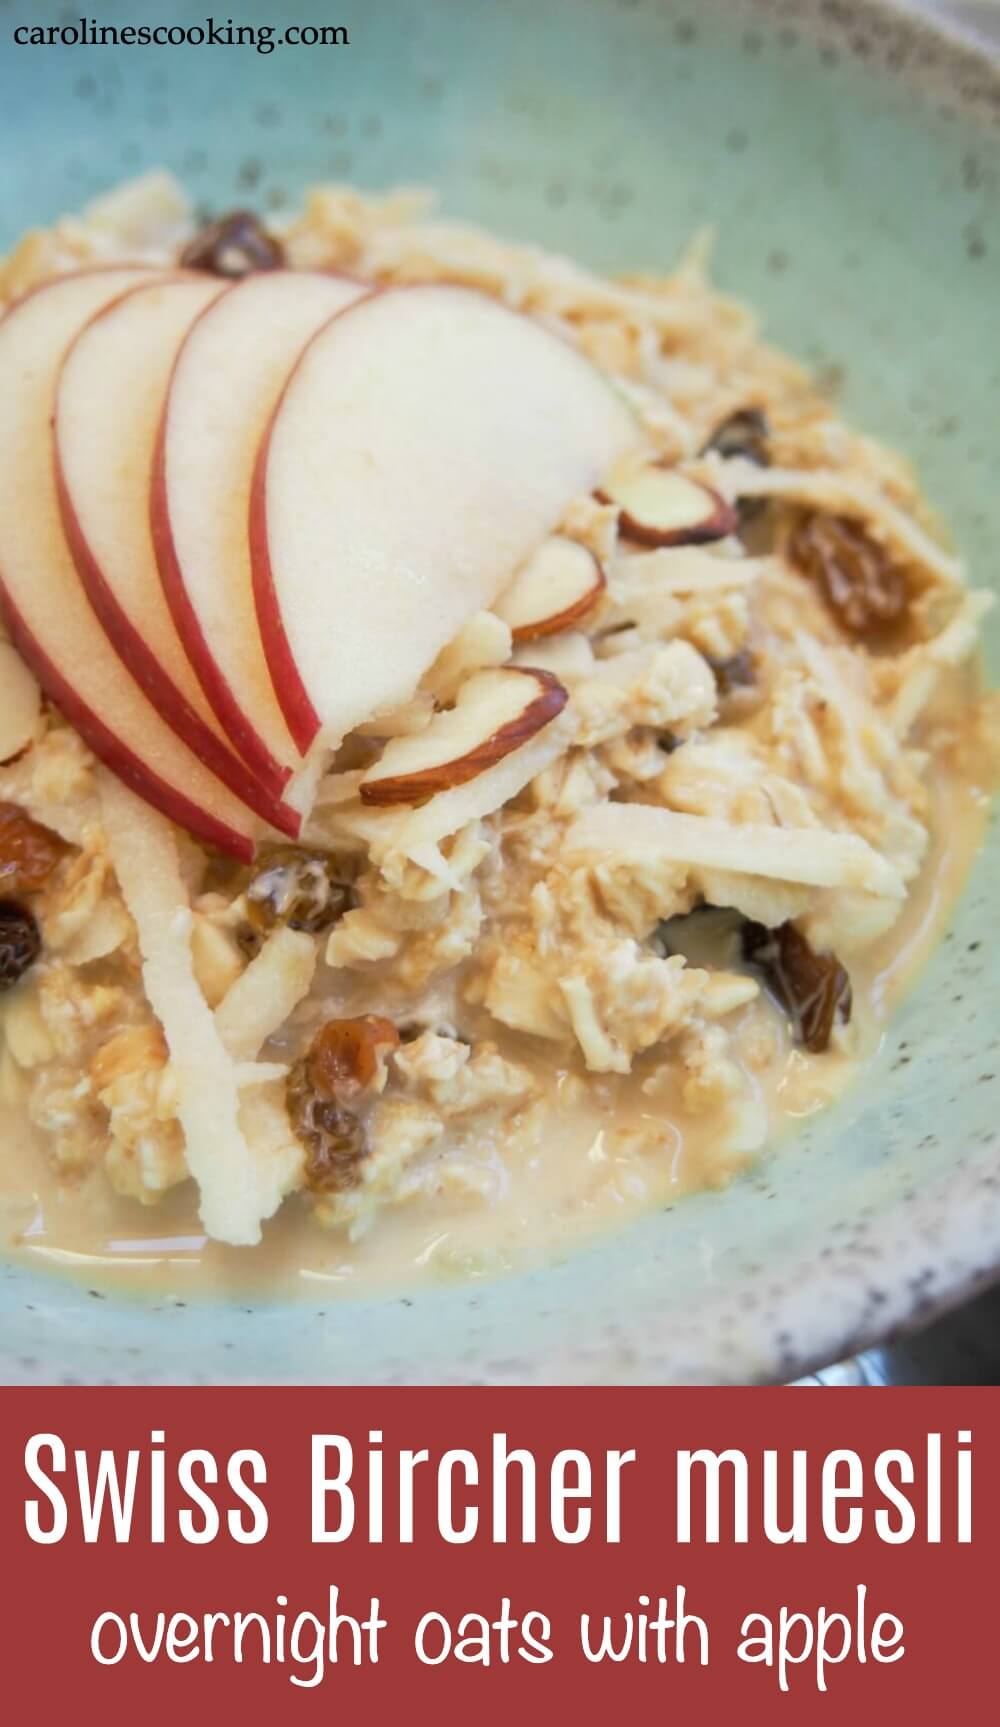 This delicious Swiss bircher muesli (the original overnight oats) makes a great start to your day - fresh, healthy and a lovely balance of smoothness & crunch.  It's quick and easy to make, and is easily made dairy-free.  #breakfast #easybreakfast #breakfastrecipe #overnightoats #apple